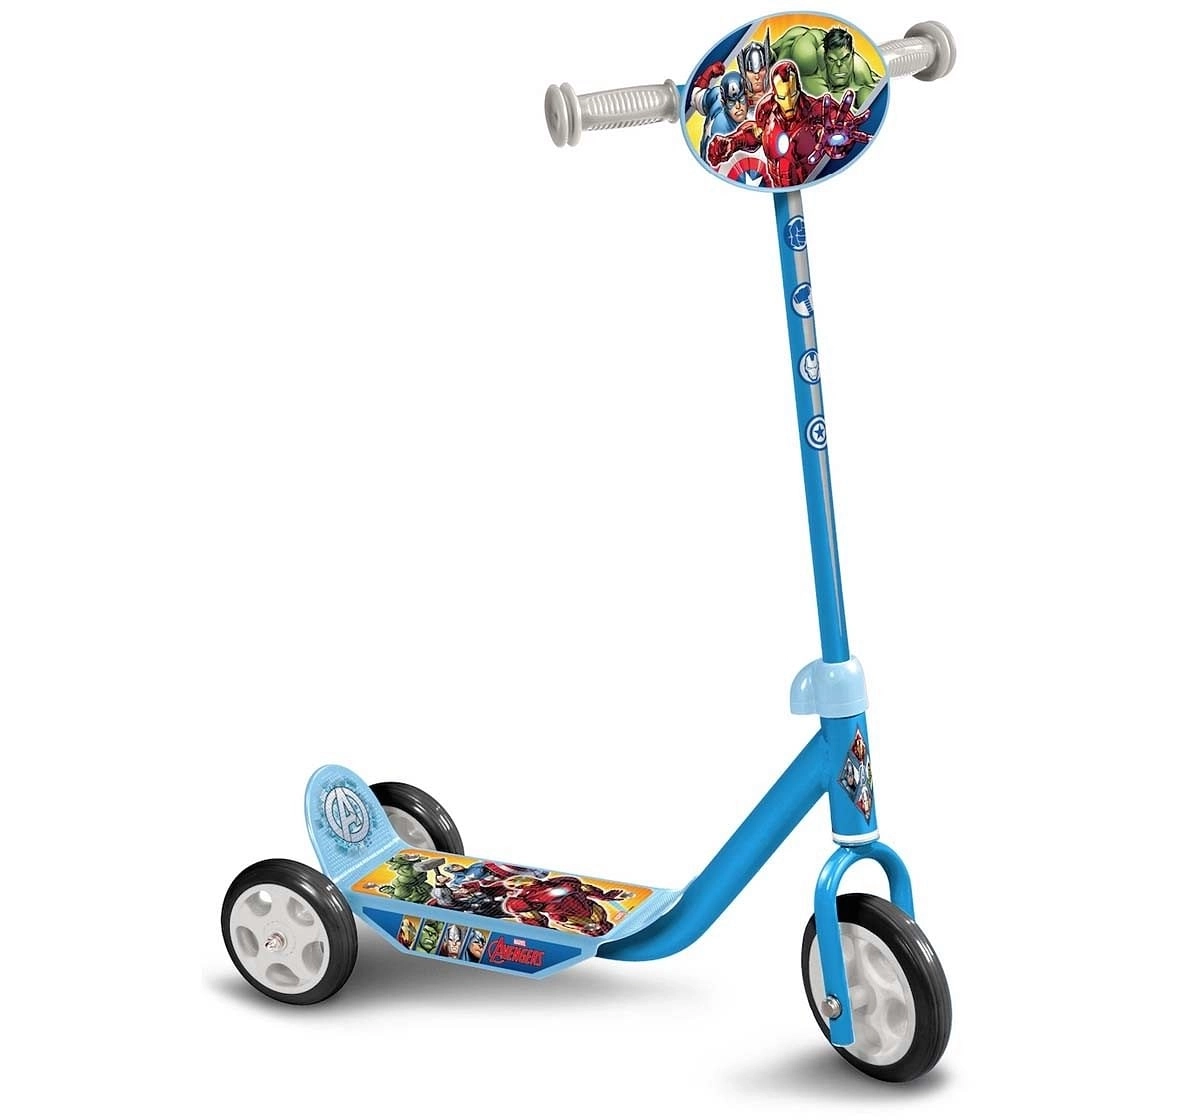 Avengers 3 Stamp Wheels Scooters for Kids age 2Y+ 